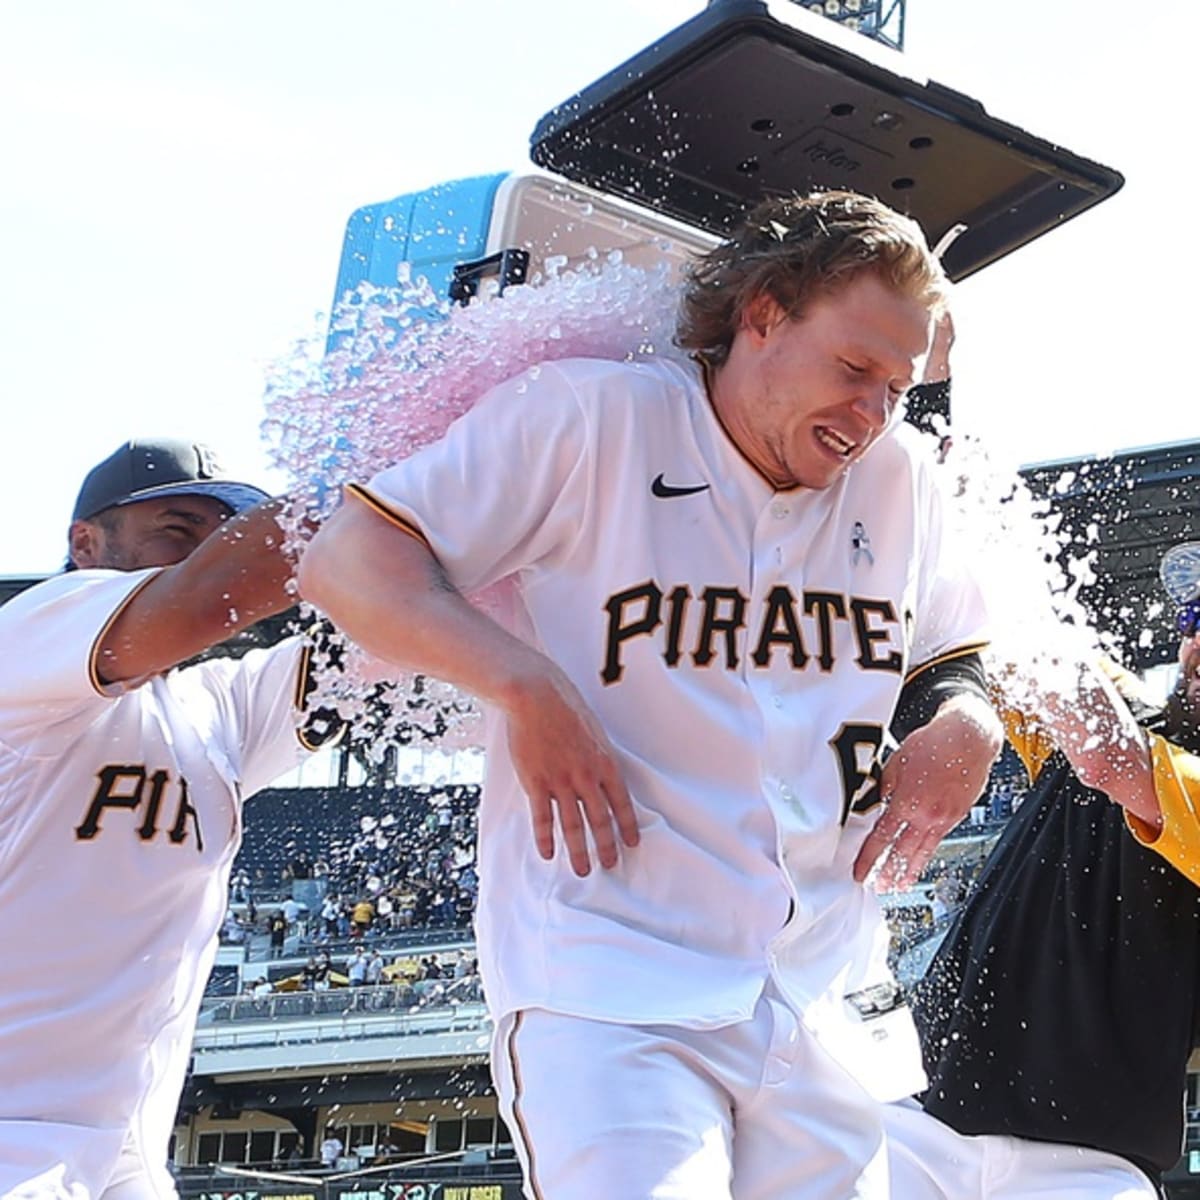 Pirates swept by Giants after walkoff seals 8-7 defeat - Bucs Dugout